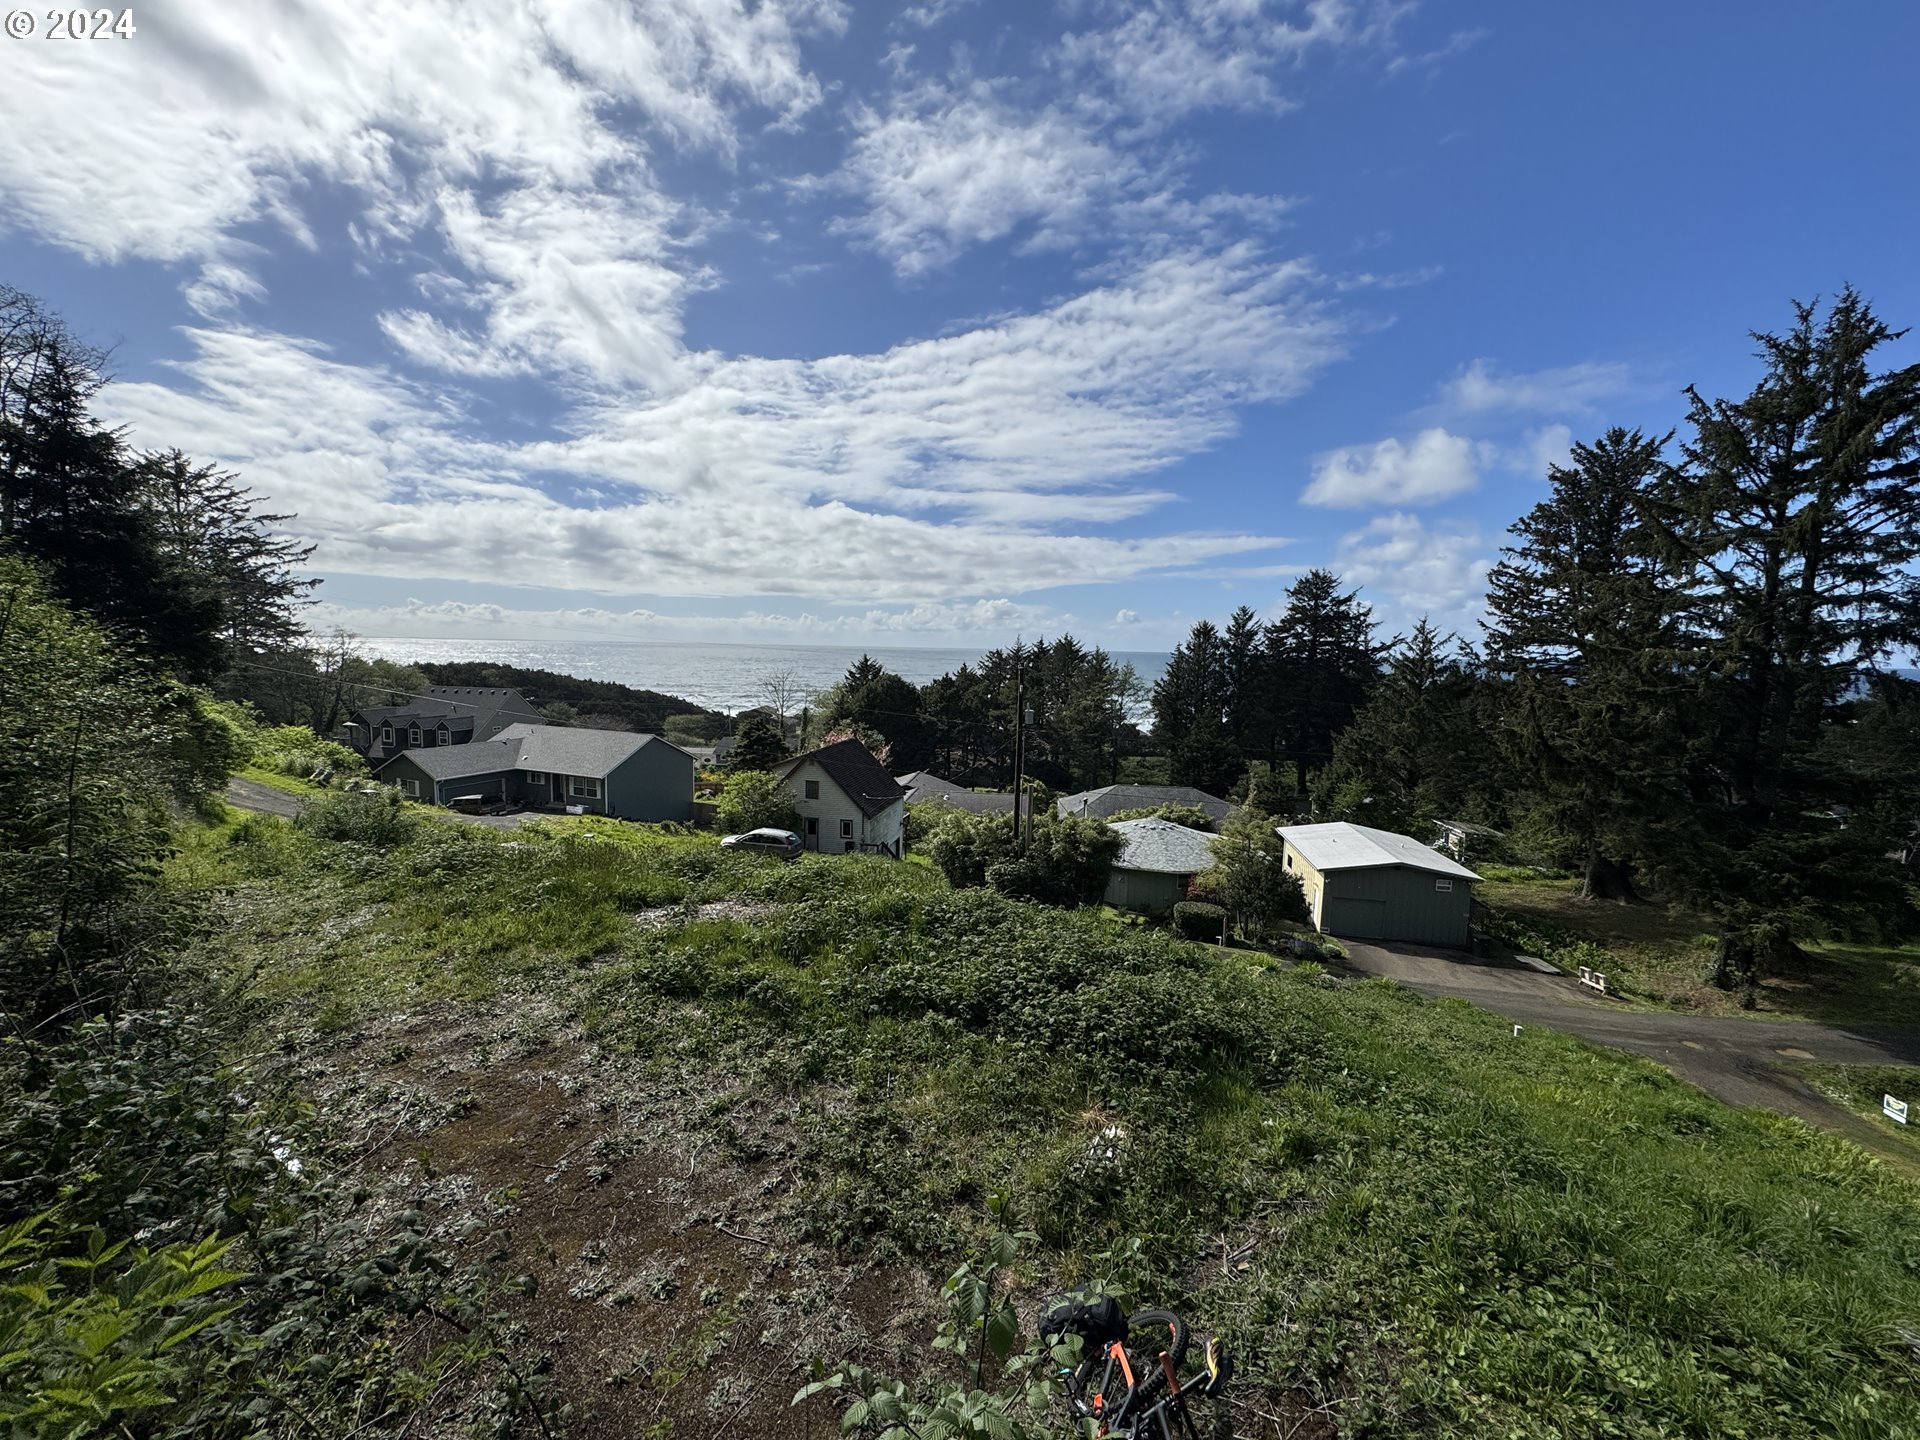 2500 Overlook DR, Yachats, OR 97498